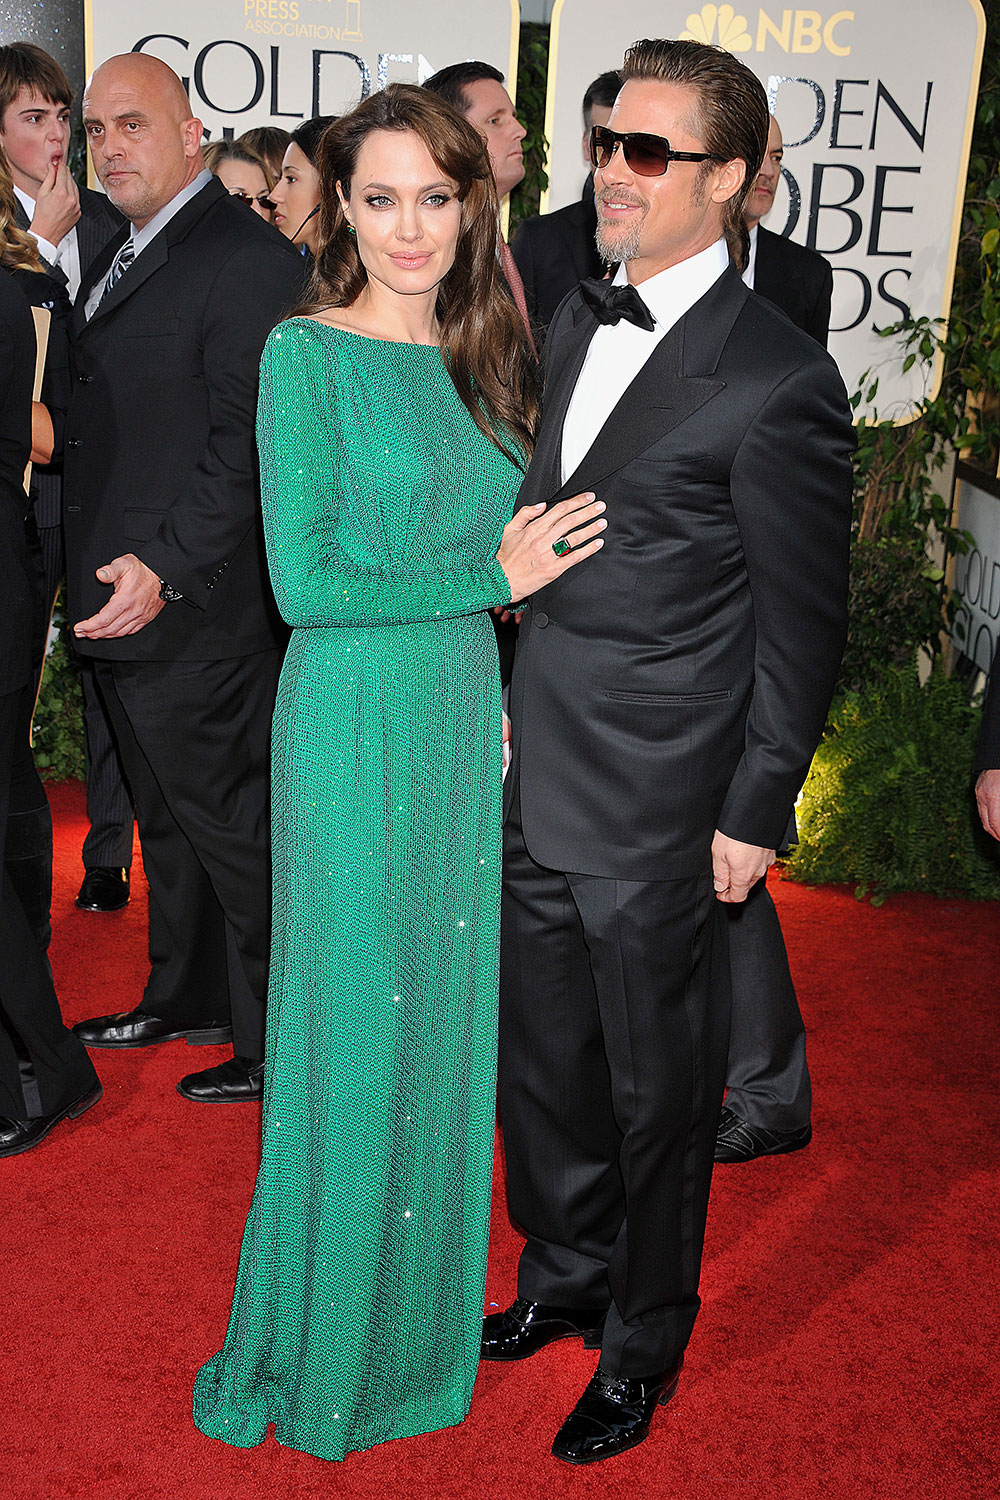 Brad Pitt and Angelina Jolie at the 68th Annual Golden Globe Awards in 2011